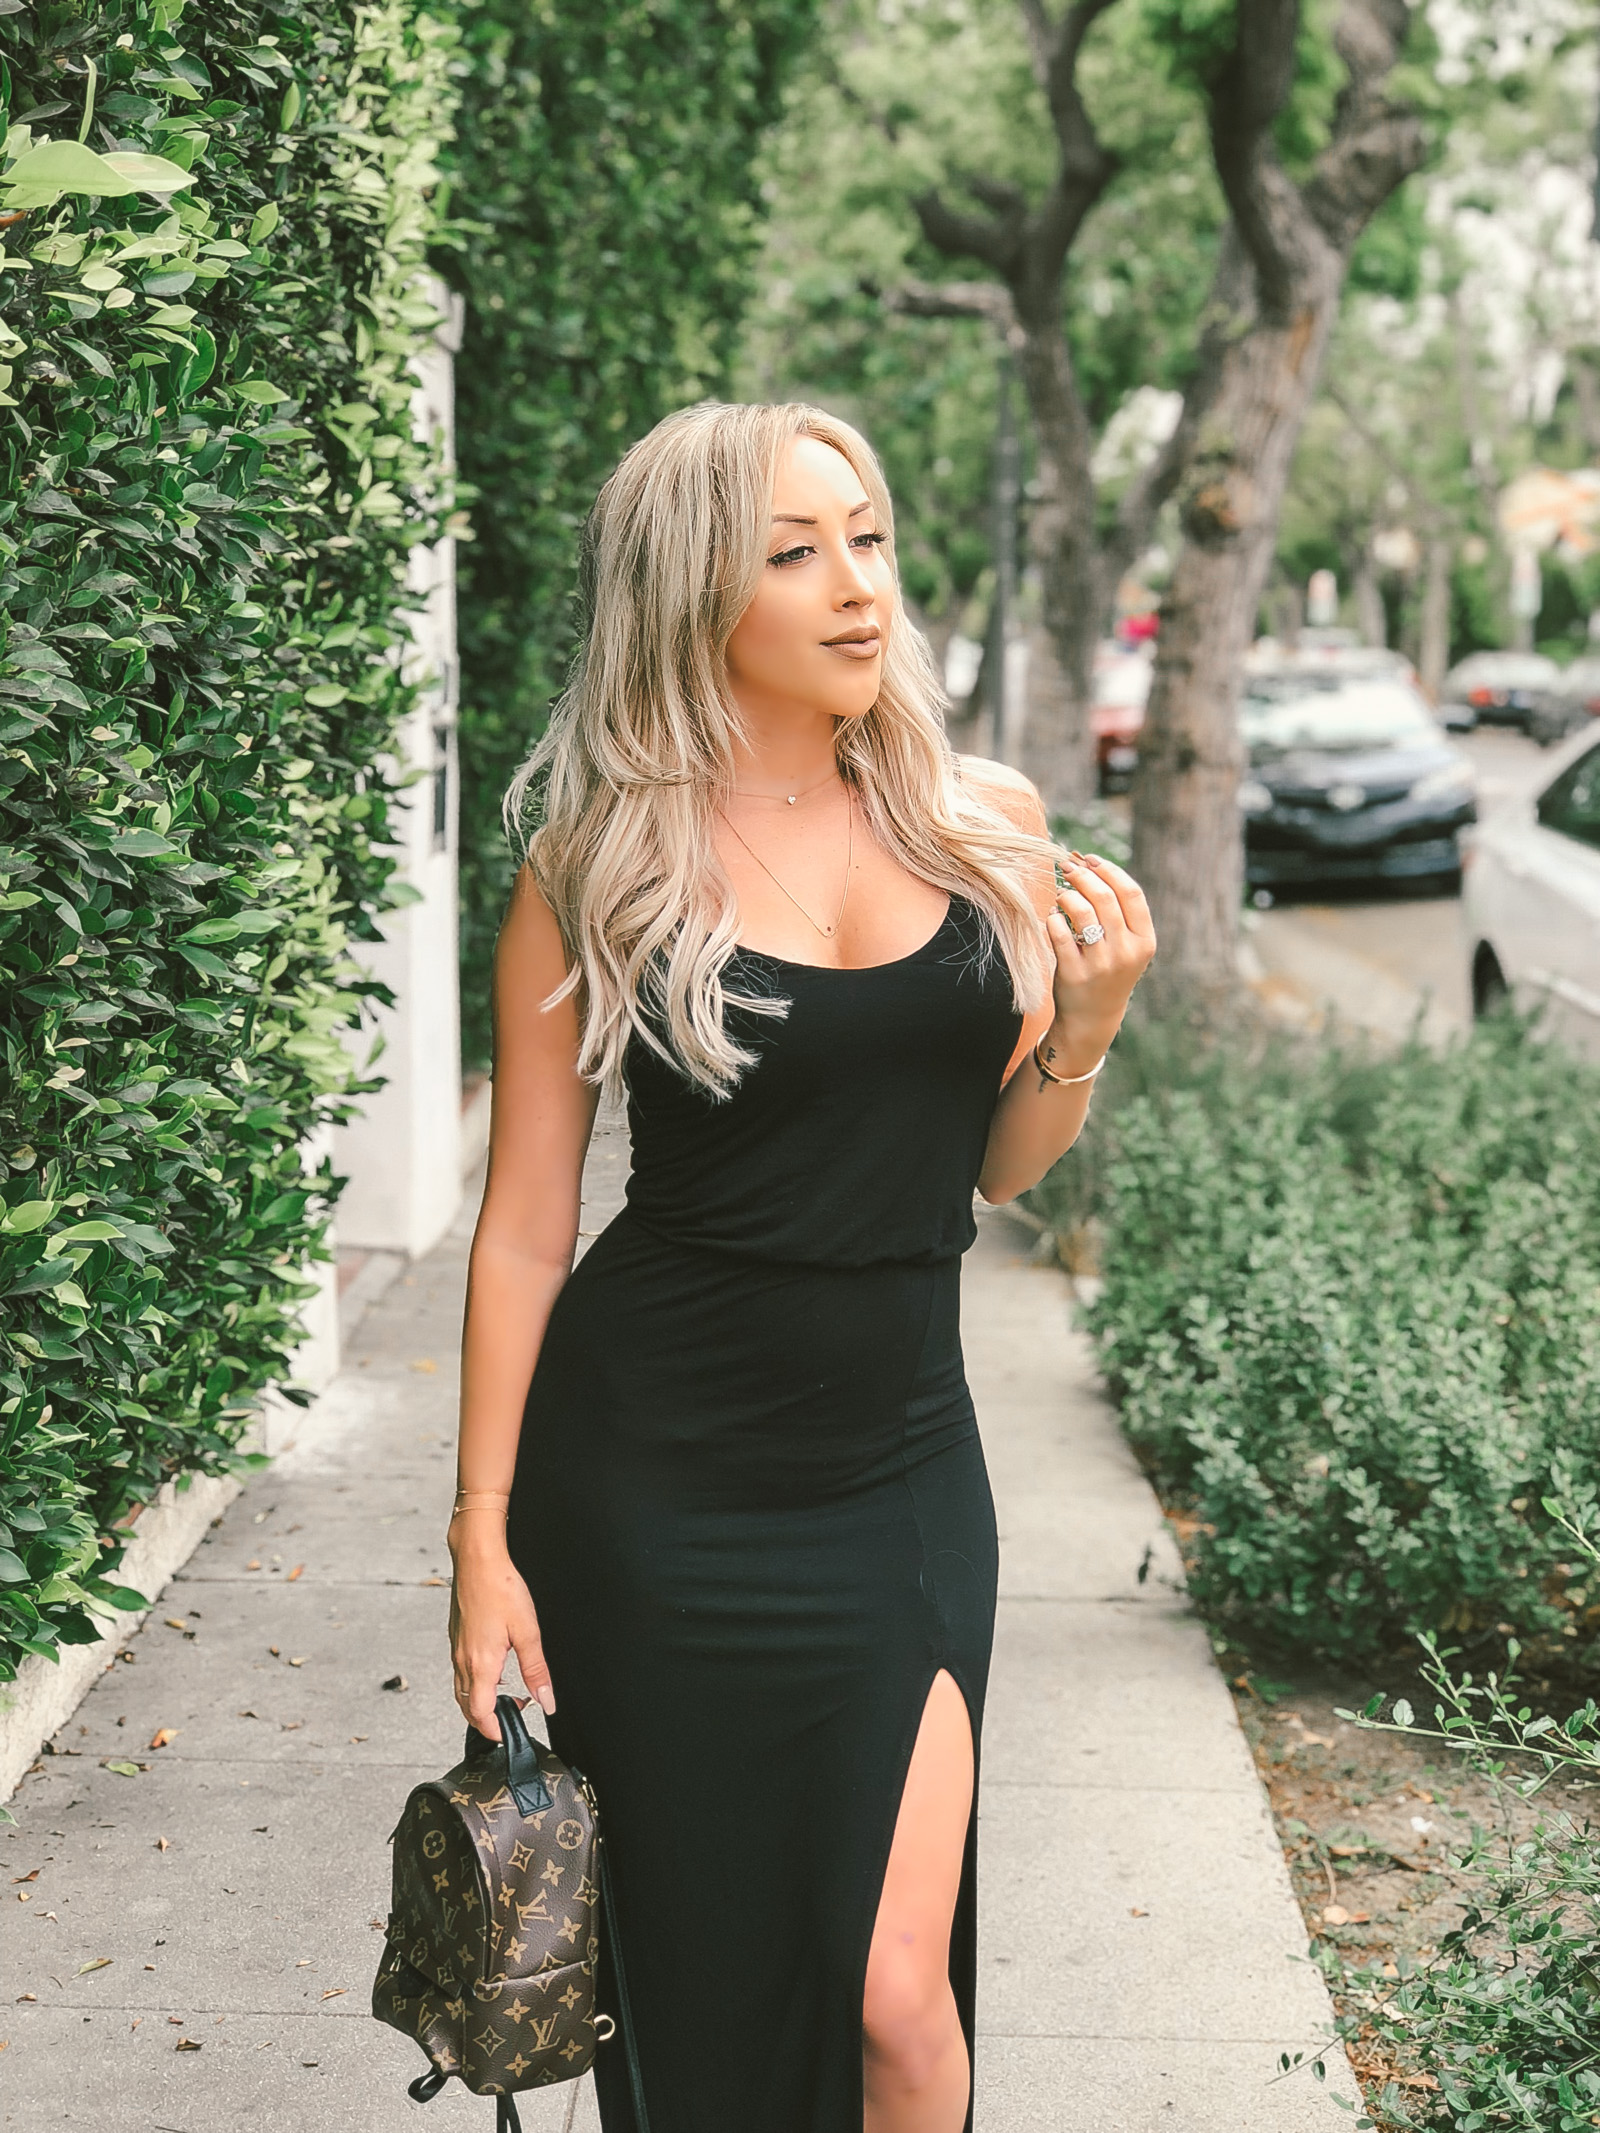 Black Maxi Dress w/ a slit | Louis Vuitton Palm Springs Backpack mini | iPhone vs. DSLR Photos | Blondie in the City by Hayley Larue